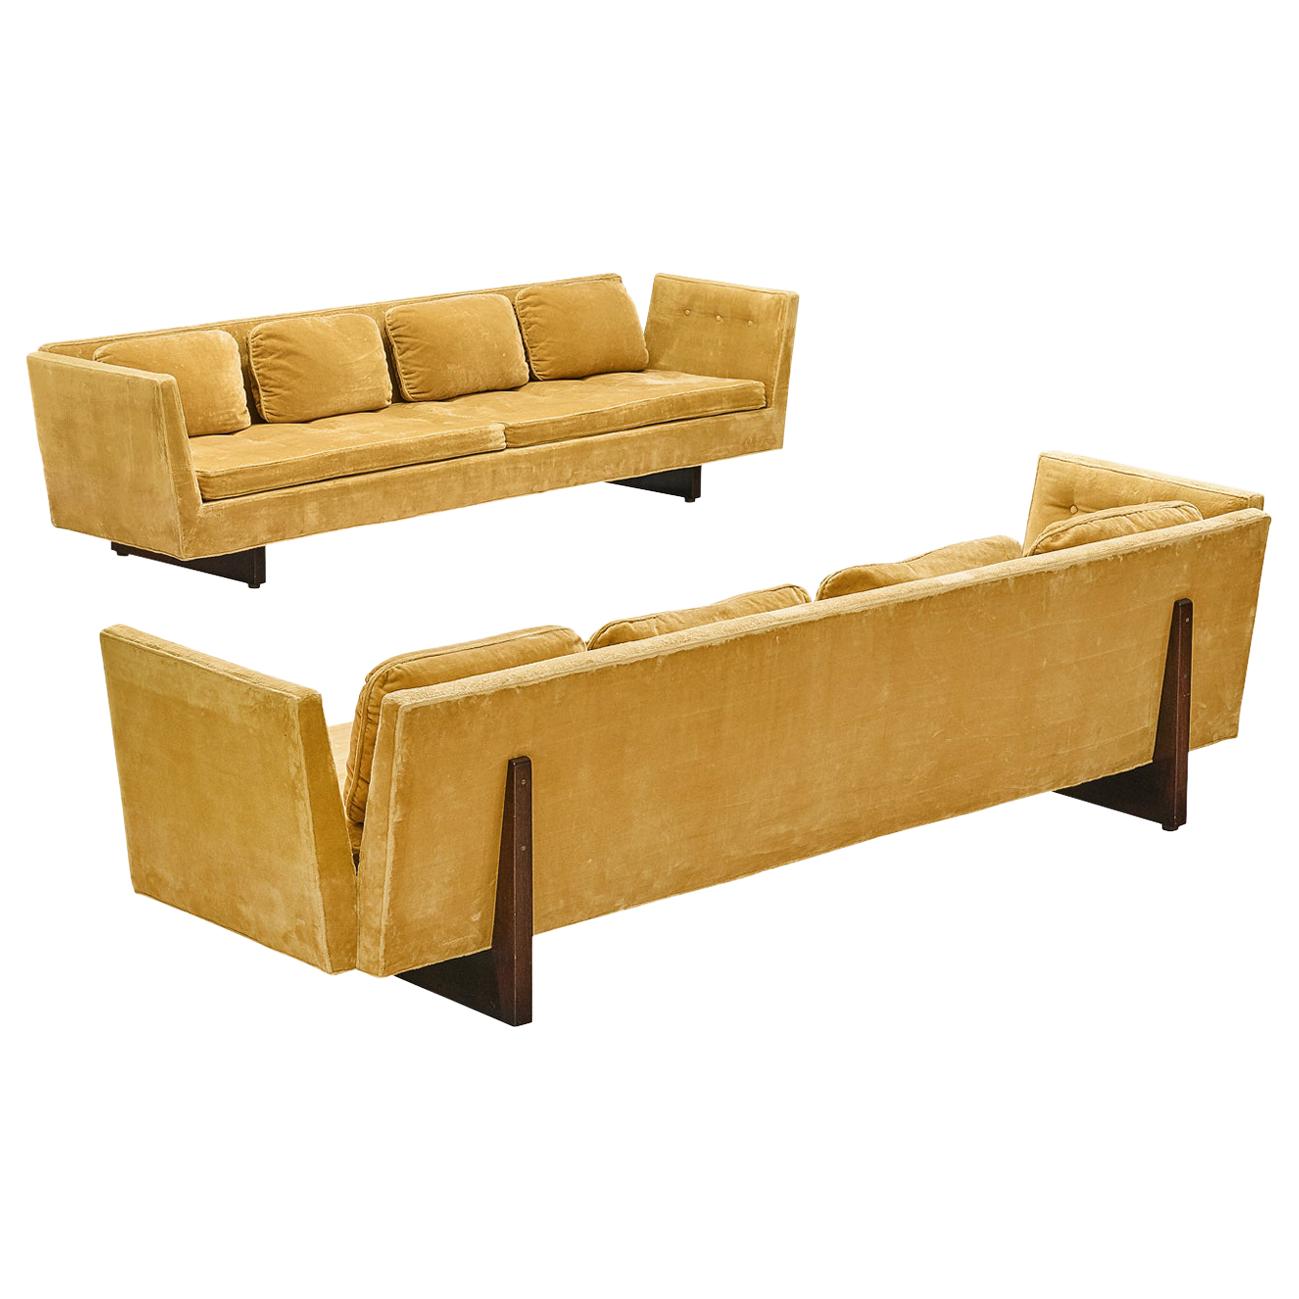 Edward Wormley for Dunbar Pair of Large Split-Arm Sofas in Yellow Upholstery